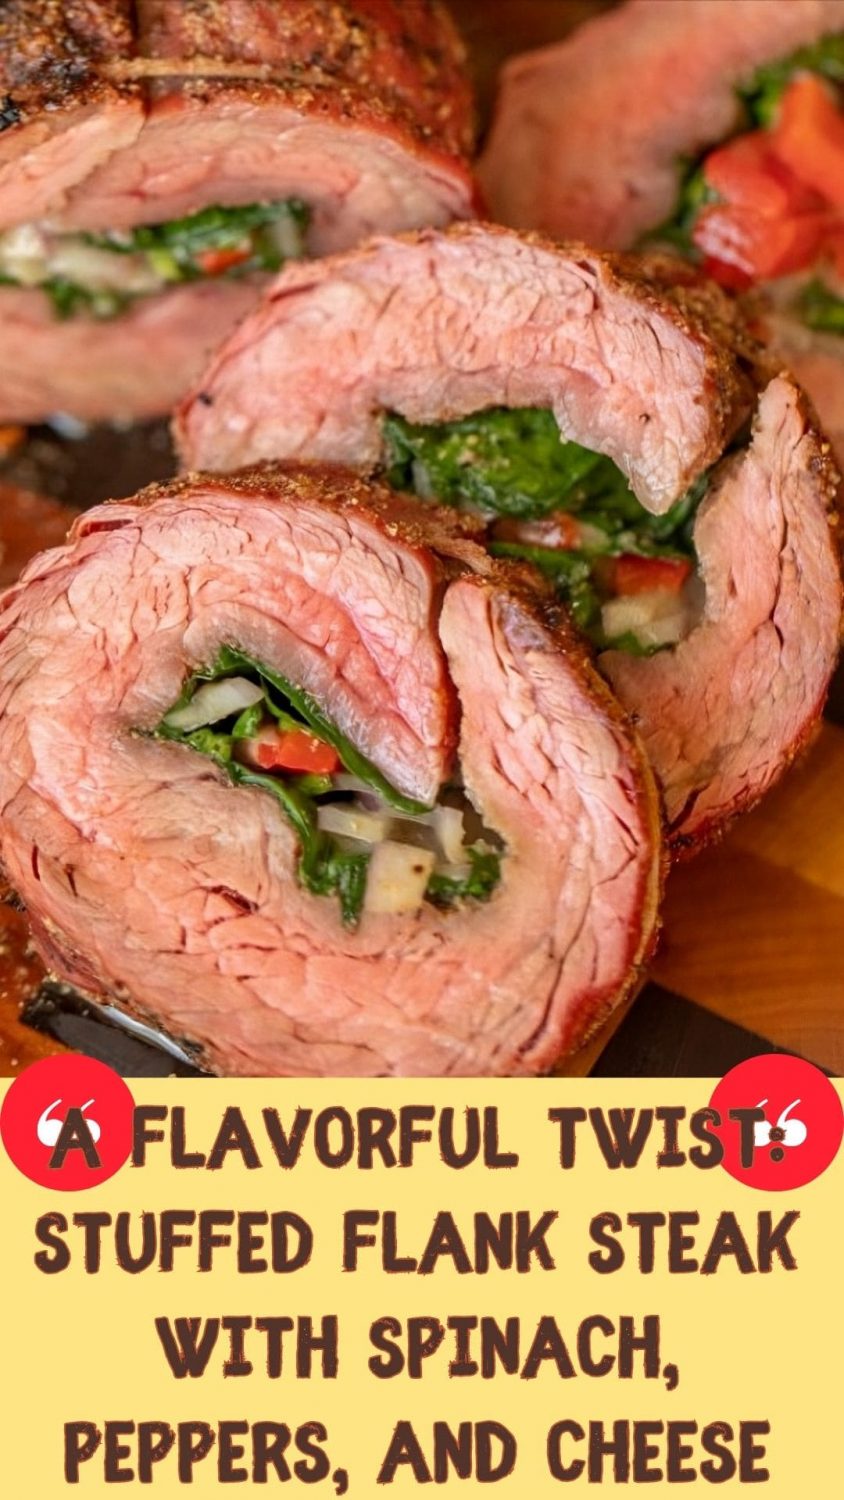 A Flavorful Twist: Stuffed Flank Steak with Spinach, Peppers, and Cheese